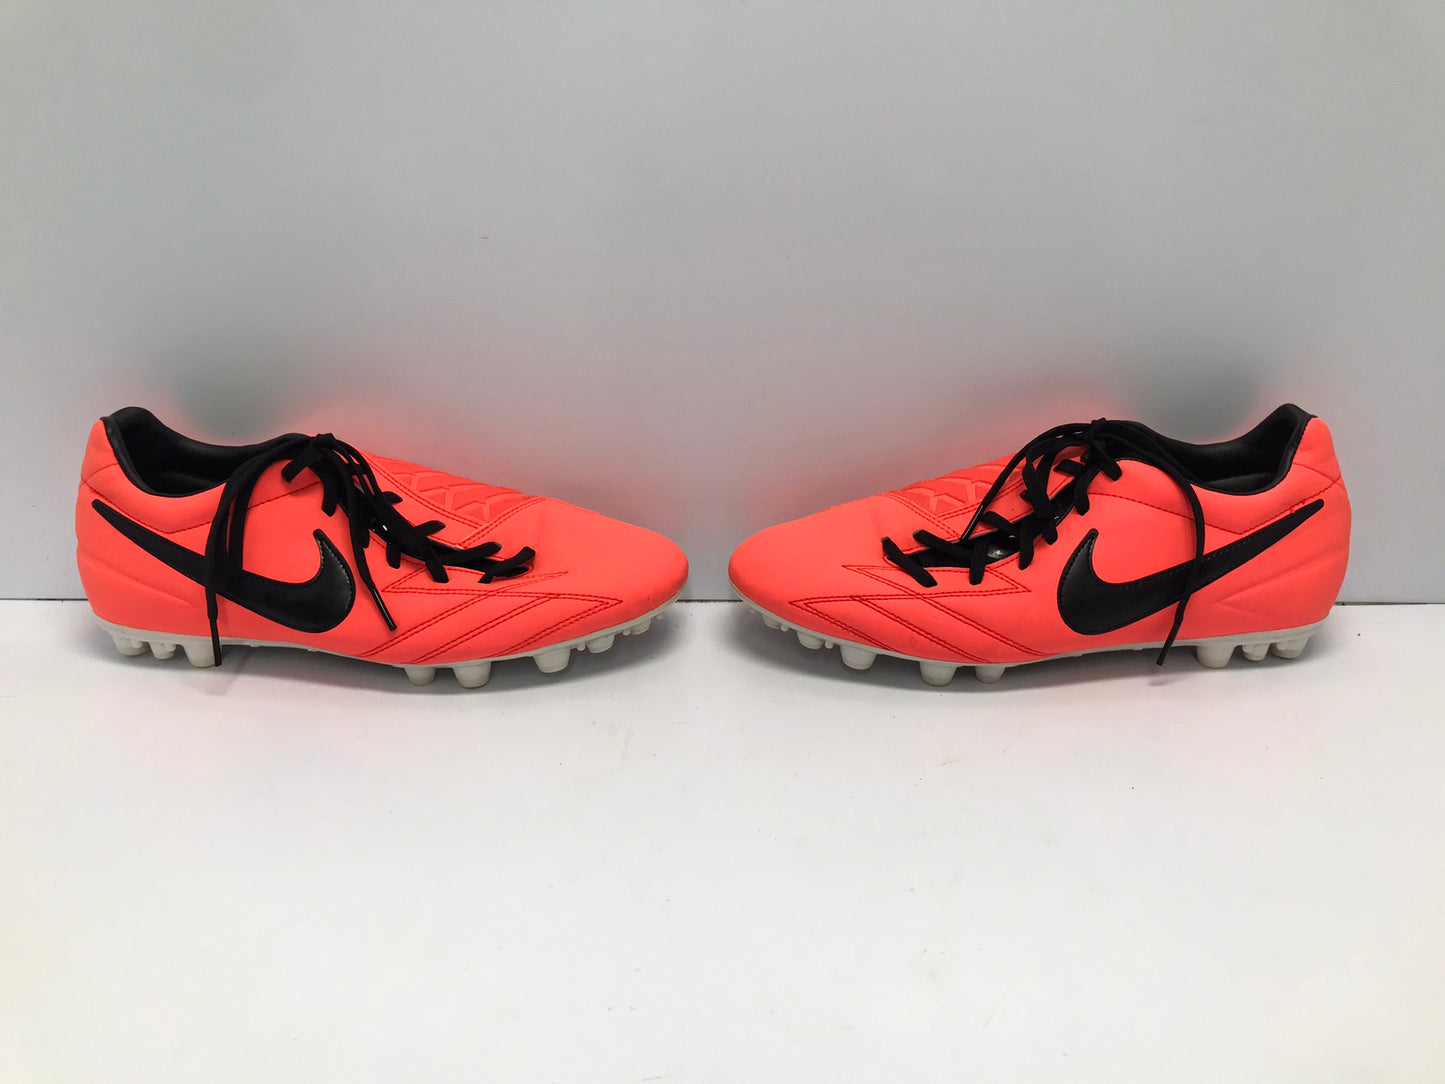 Soccer Shoes Cleats Men's Size 9.5 Nike Total Outstanding Quality Tangerine Black